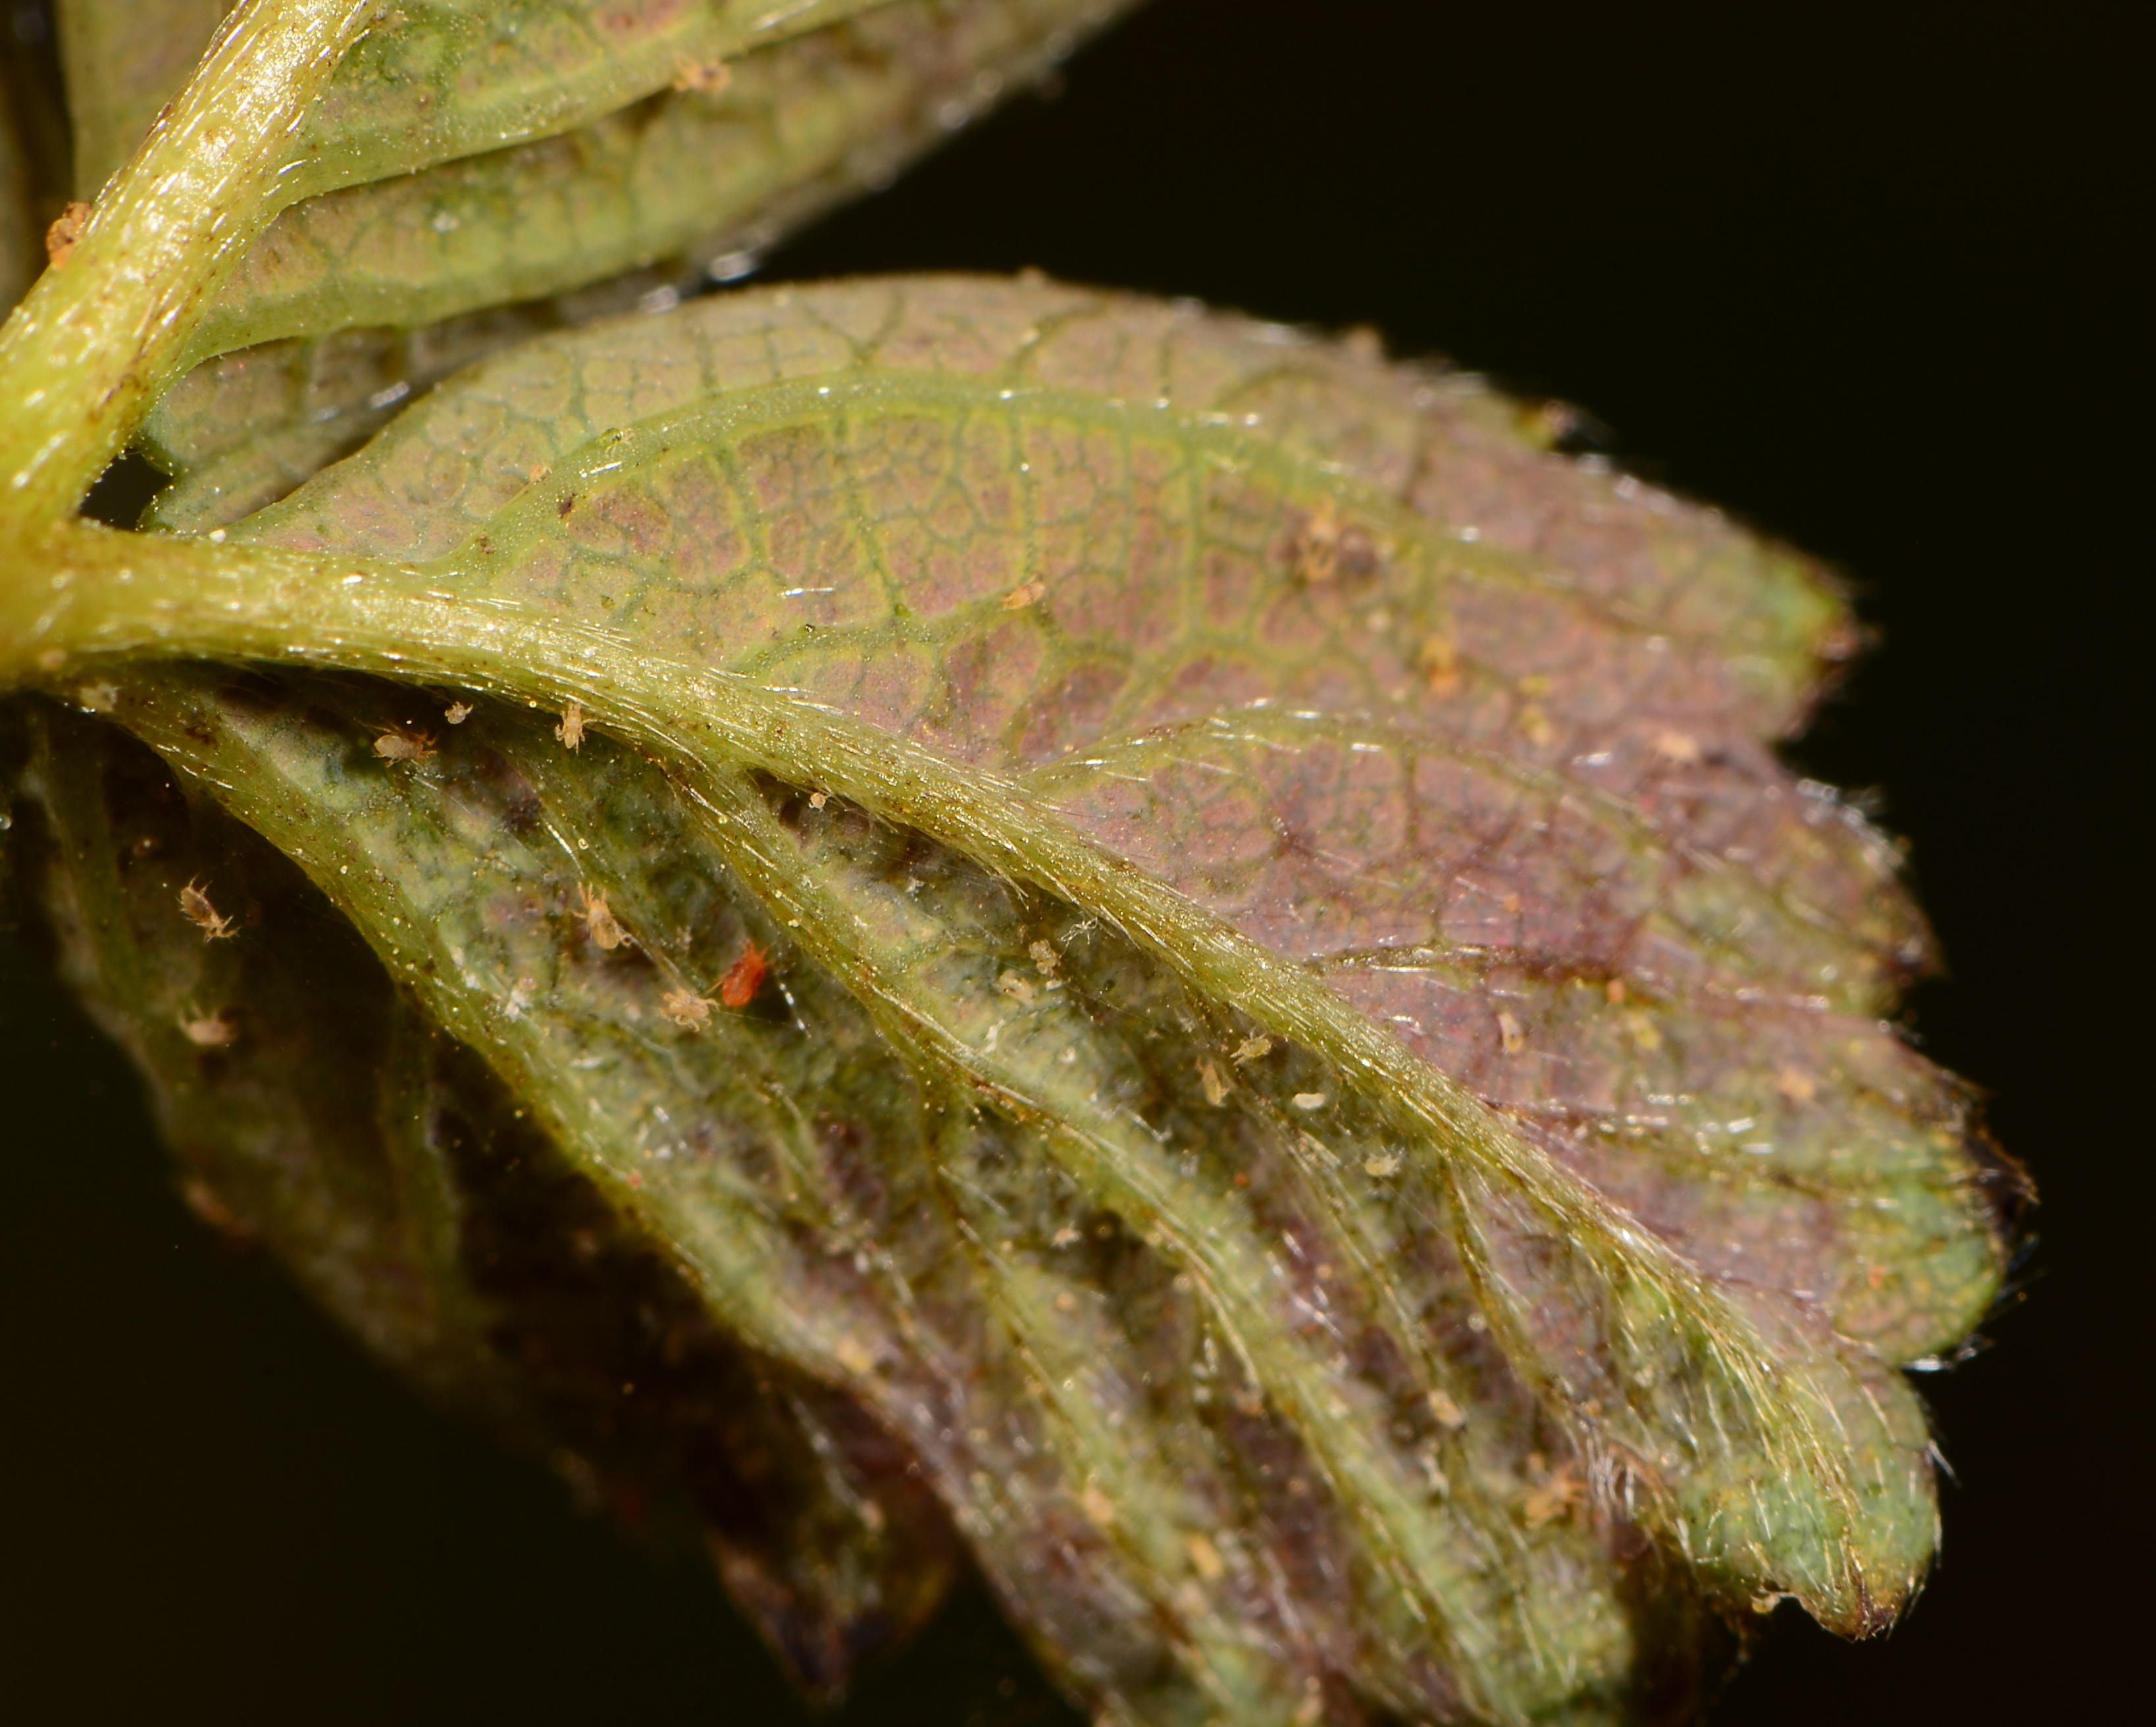 Leaf stippling and bronzing caused by two-spotted spider mites (Bessin, UKY)